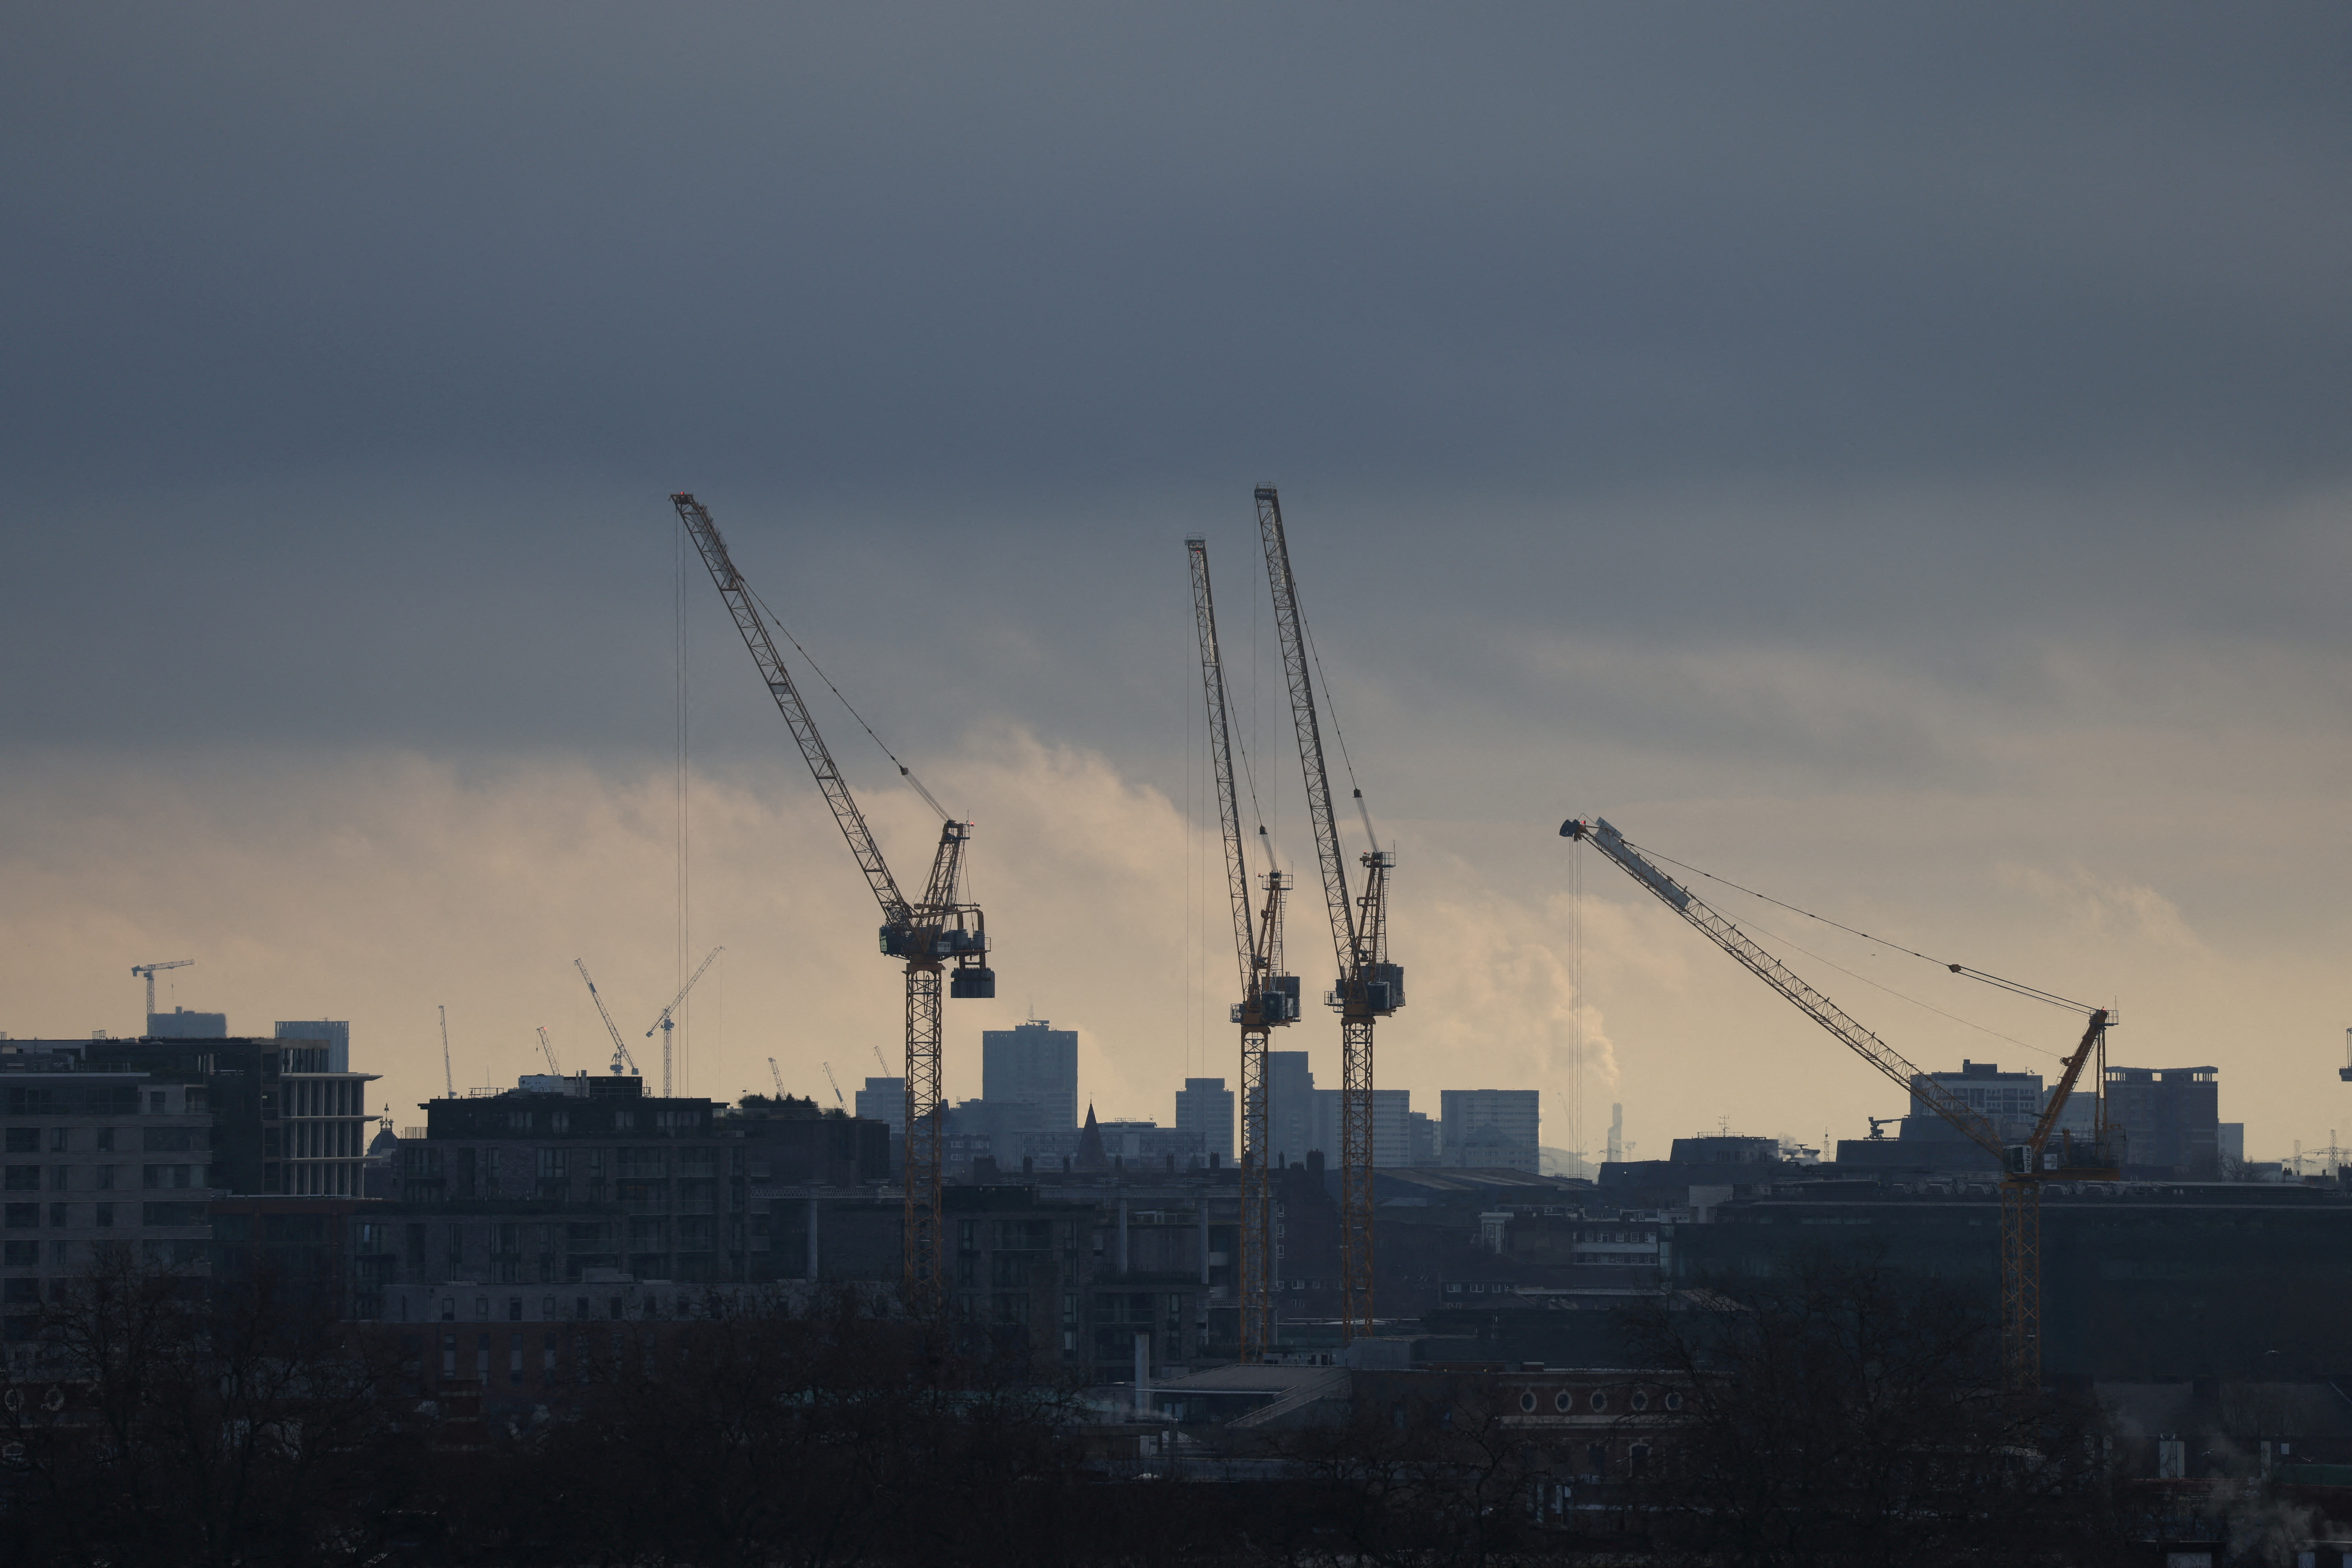 A view of construction cranes in London